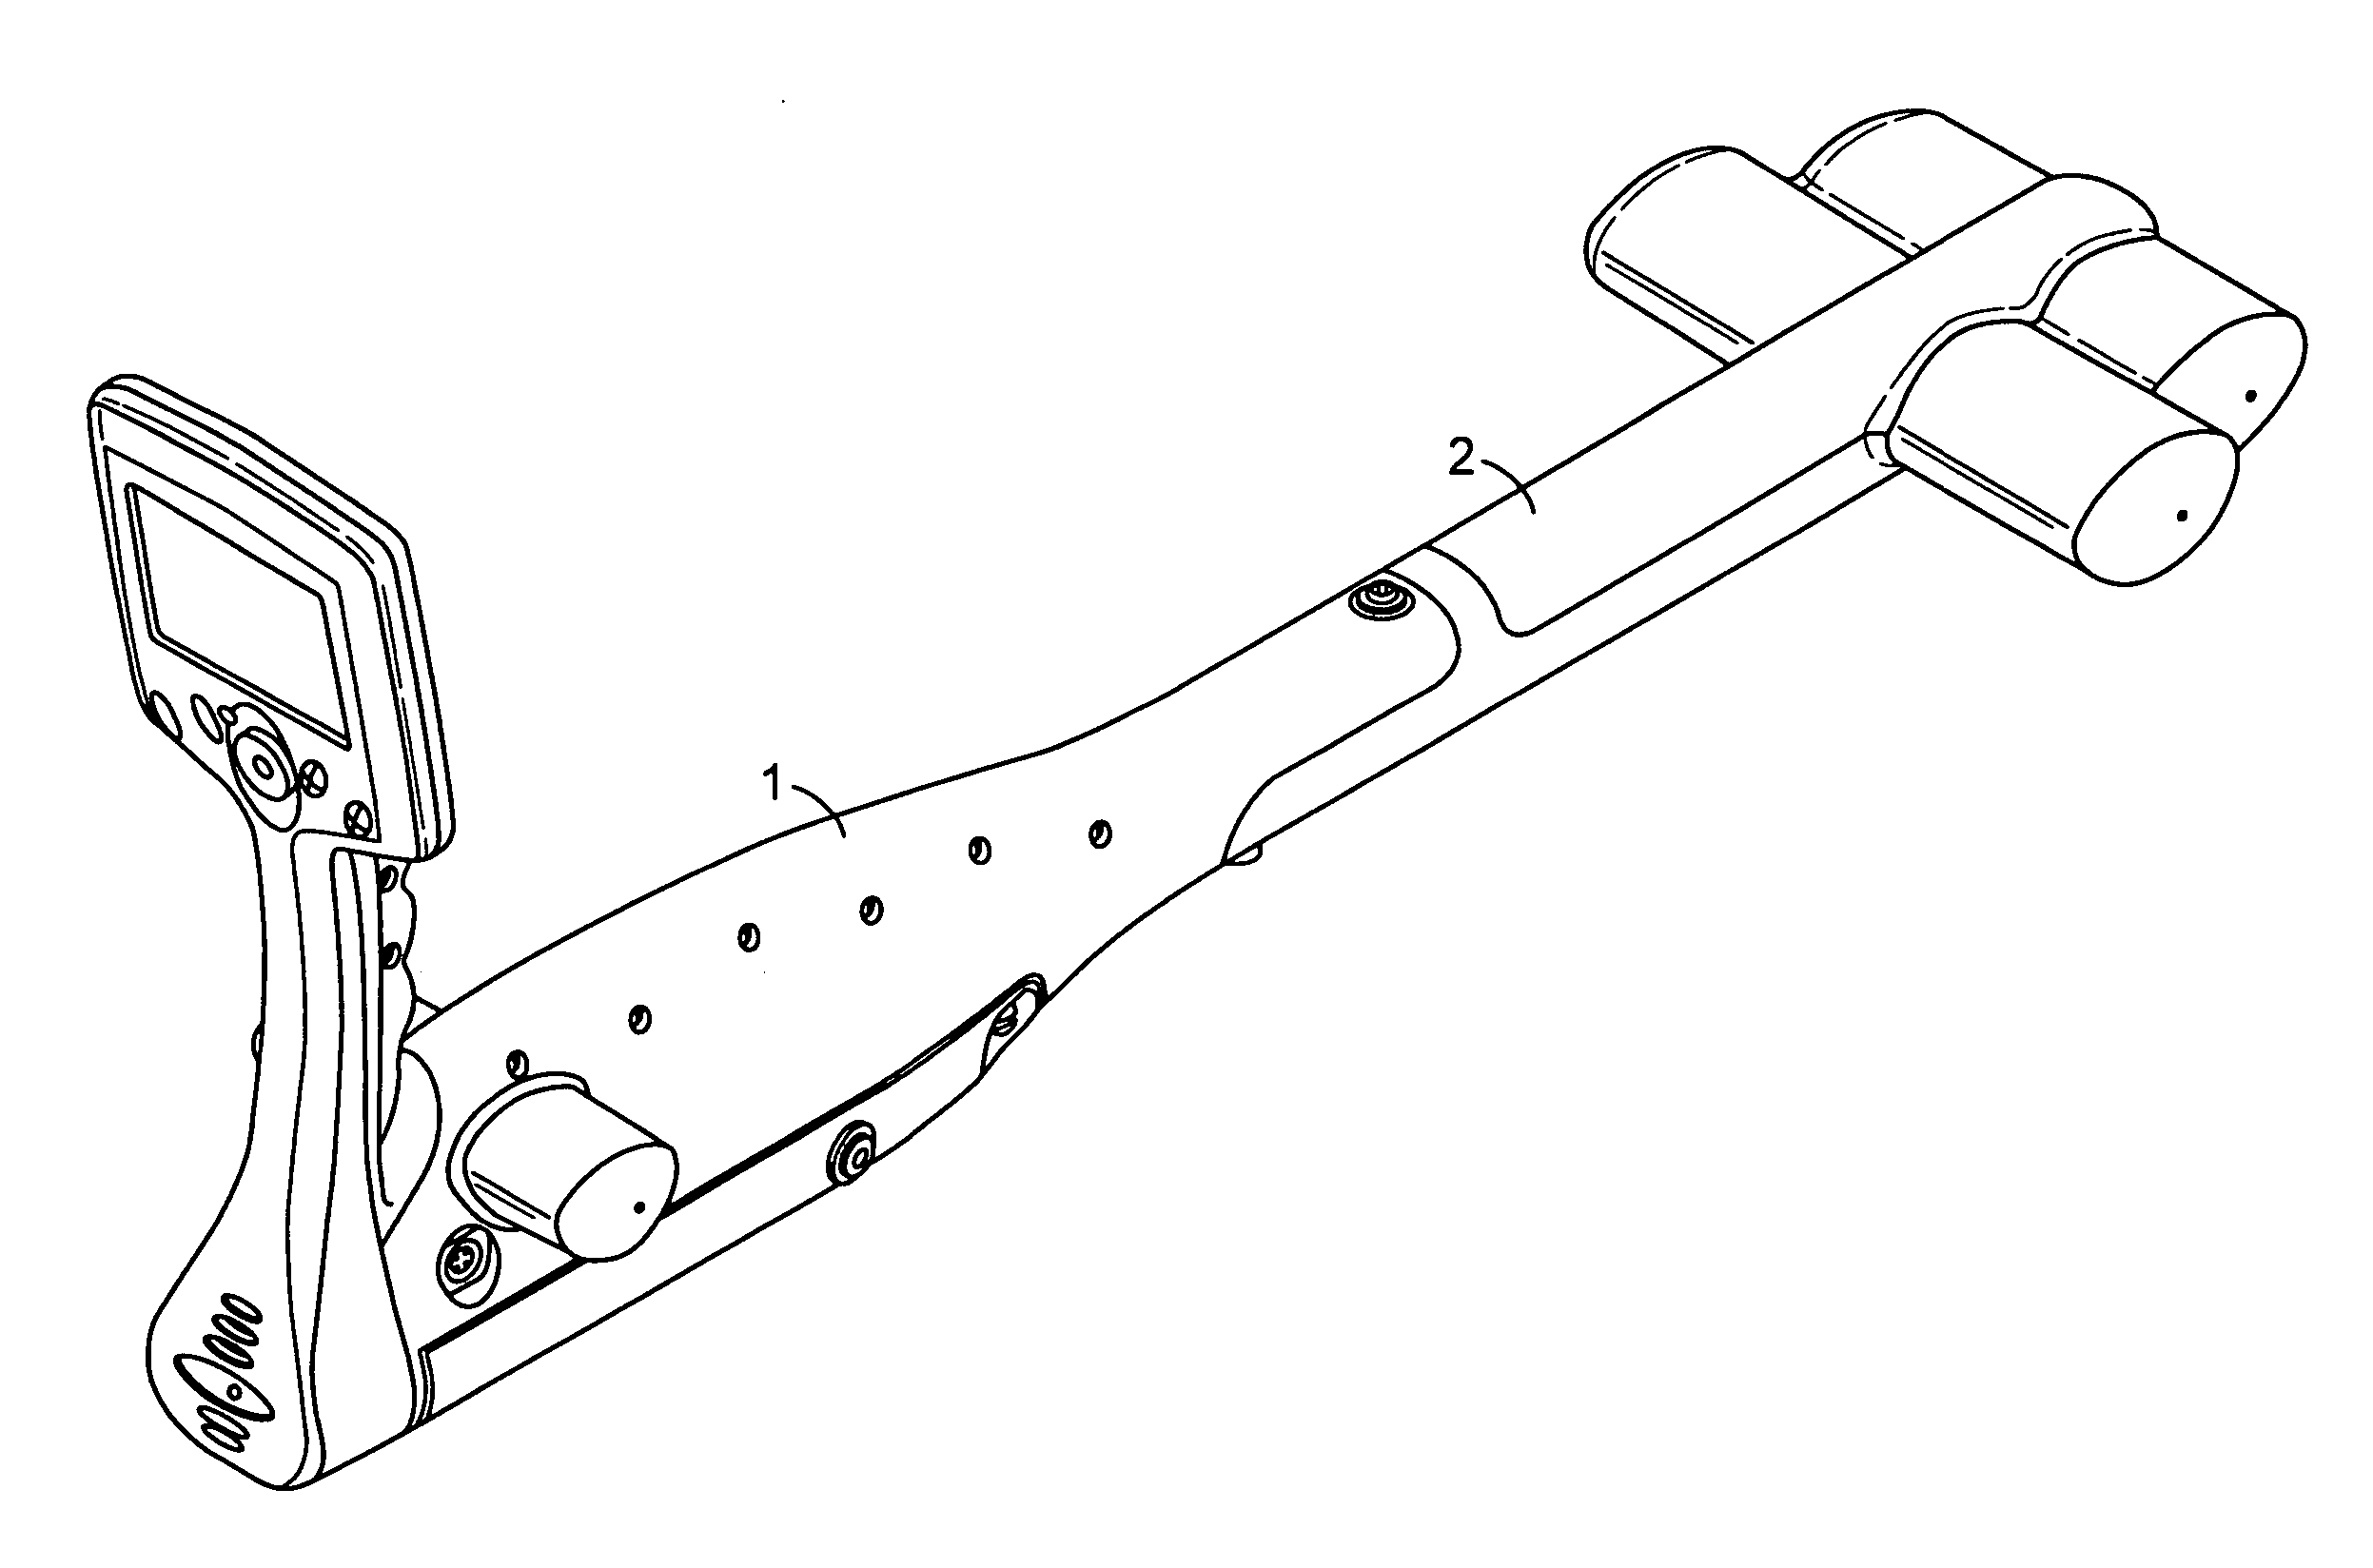 Locator with removable antenna portion